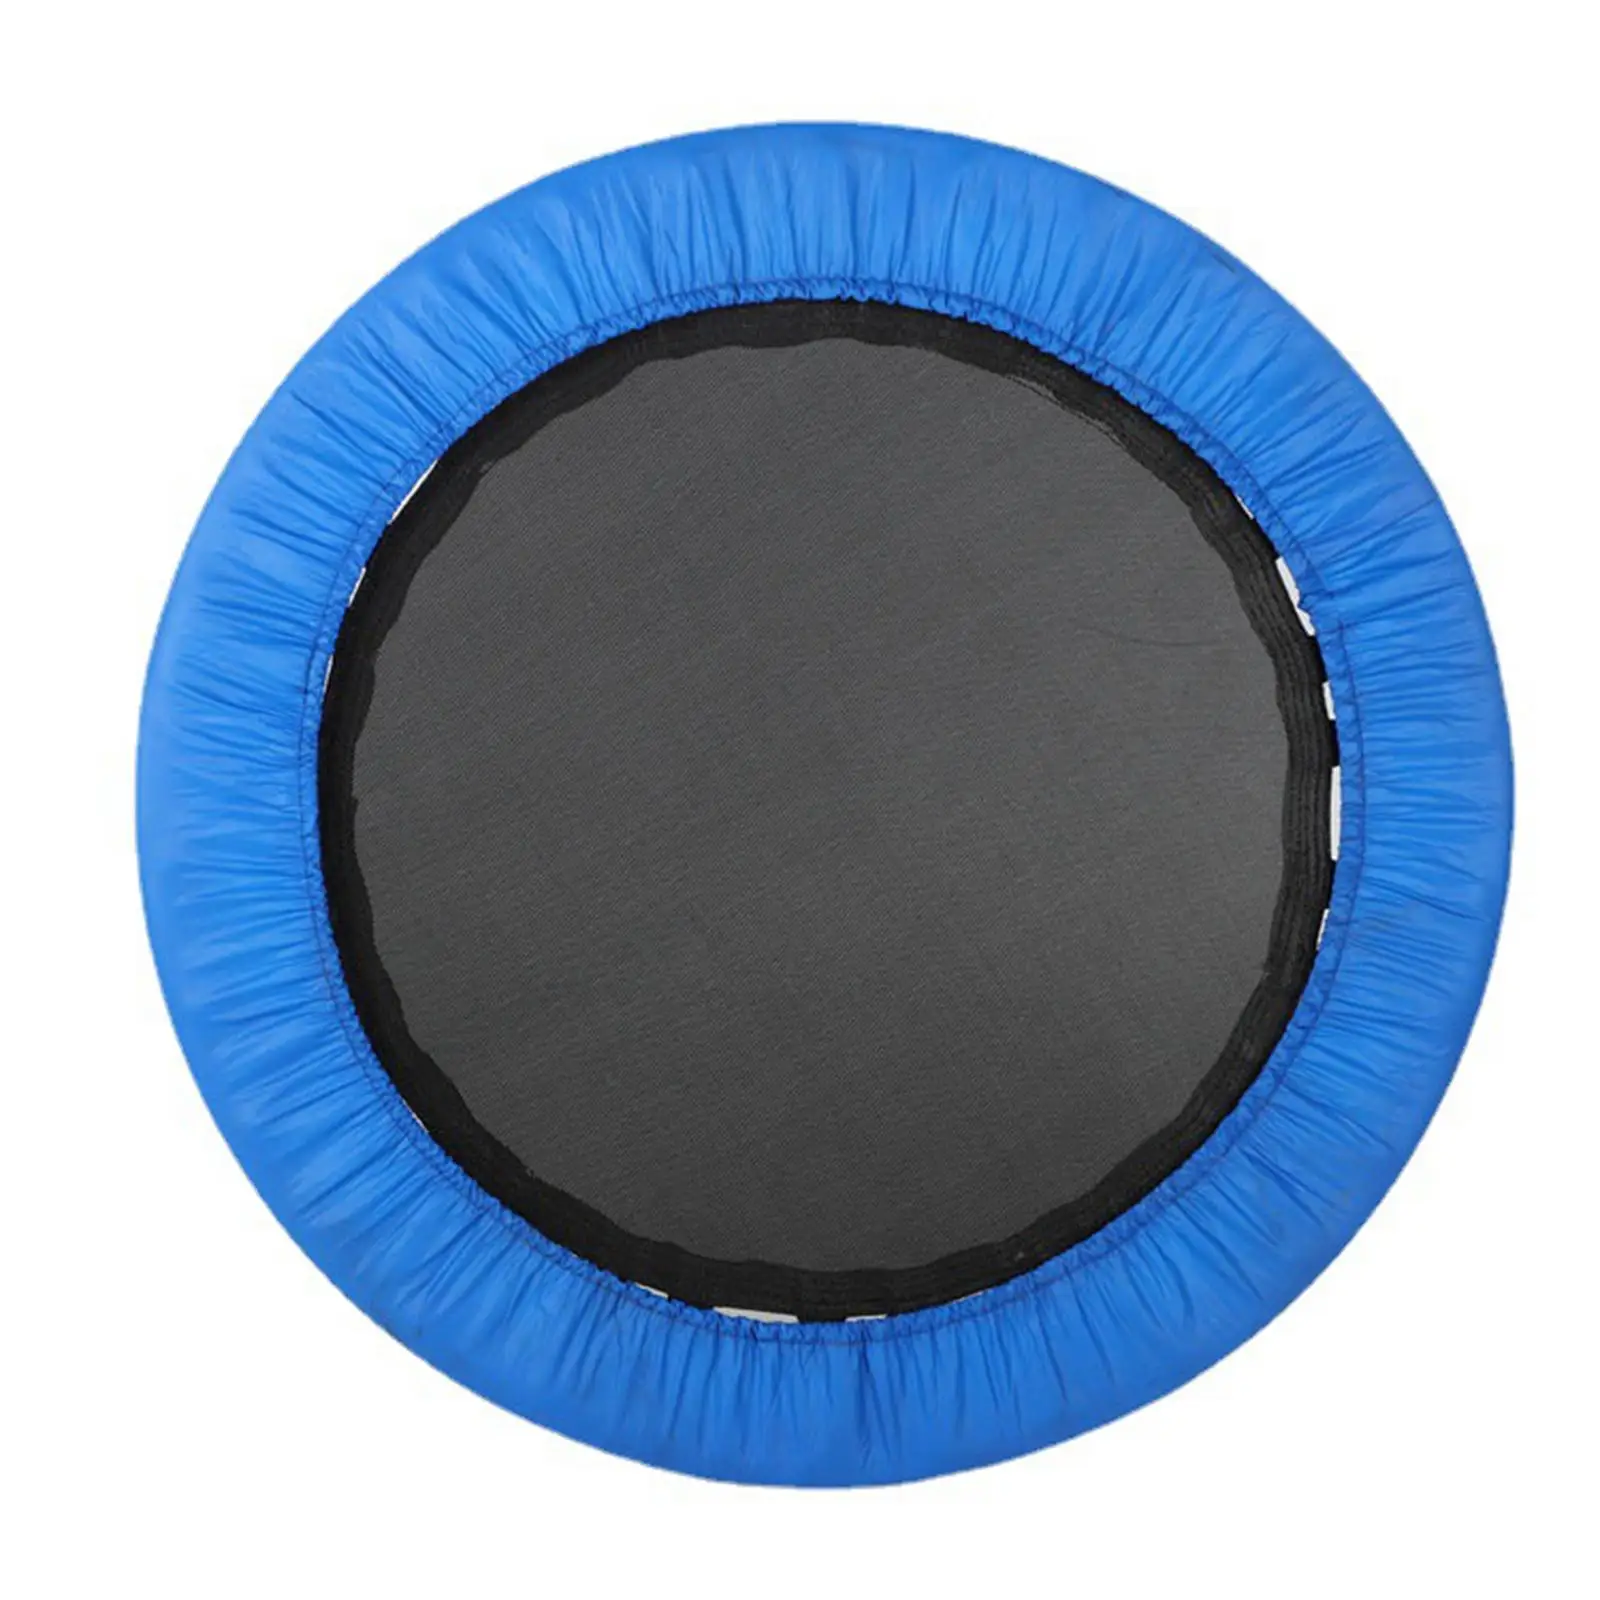 Trampoline Mat Replacement Jumping Mat Accessory Reusable Premium Pad Round Jumping Pad Jumping Cushion for Workout Family